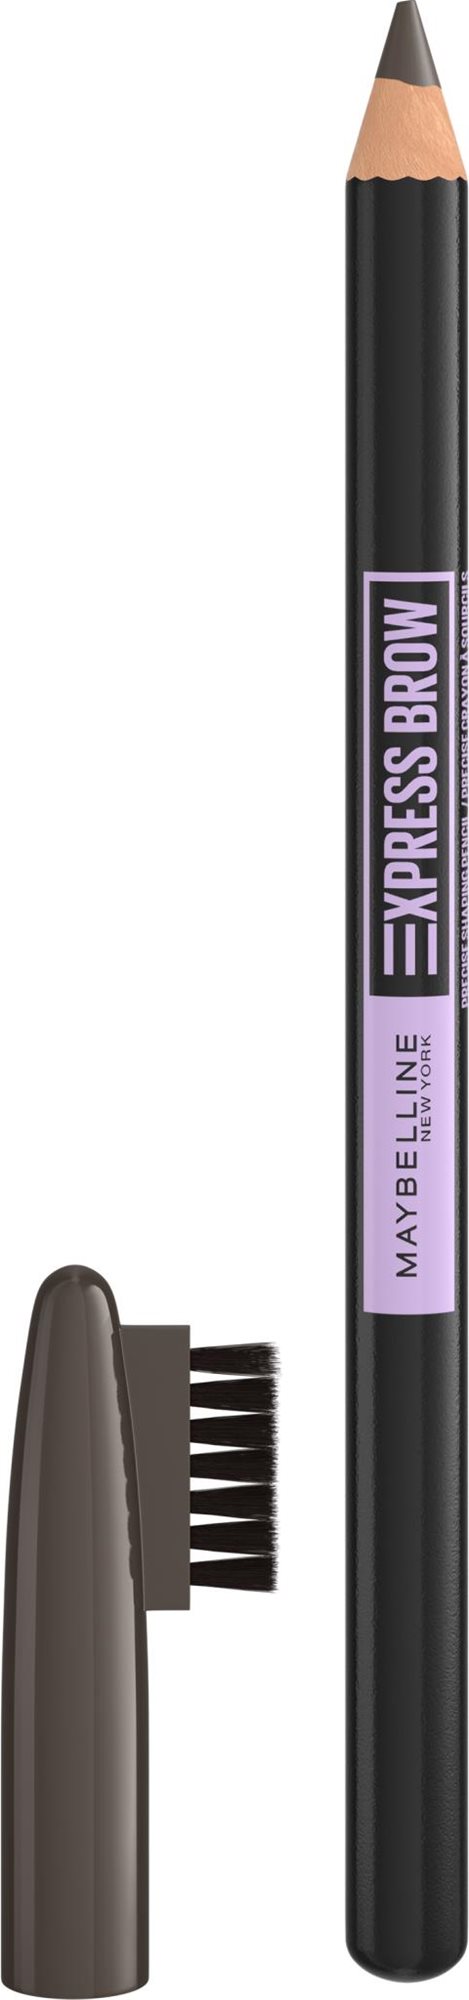 MAYBELLINE NEW YORK Express Brow Shaping Pencil 05 Deep Brown